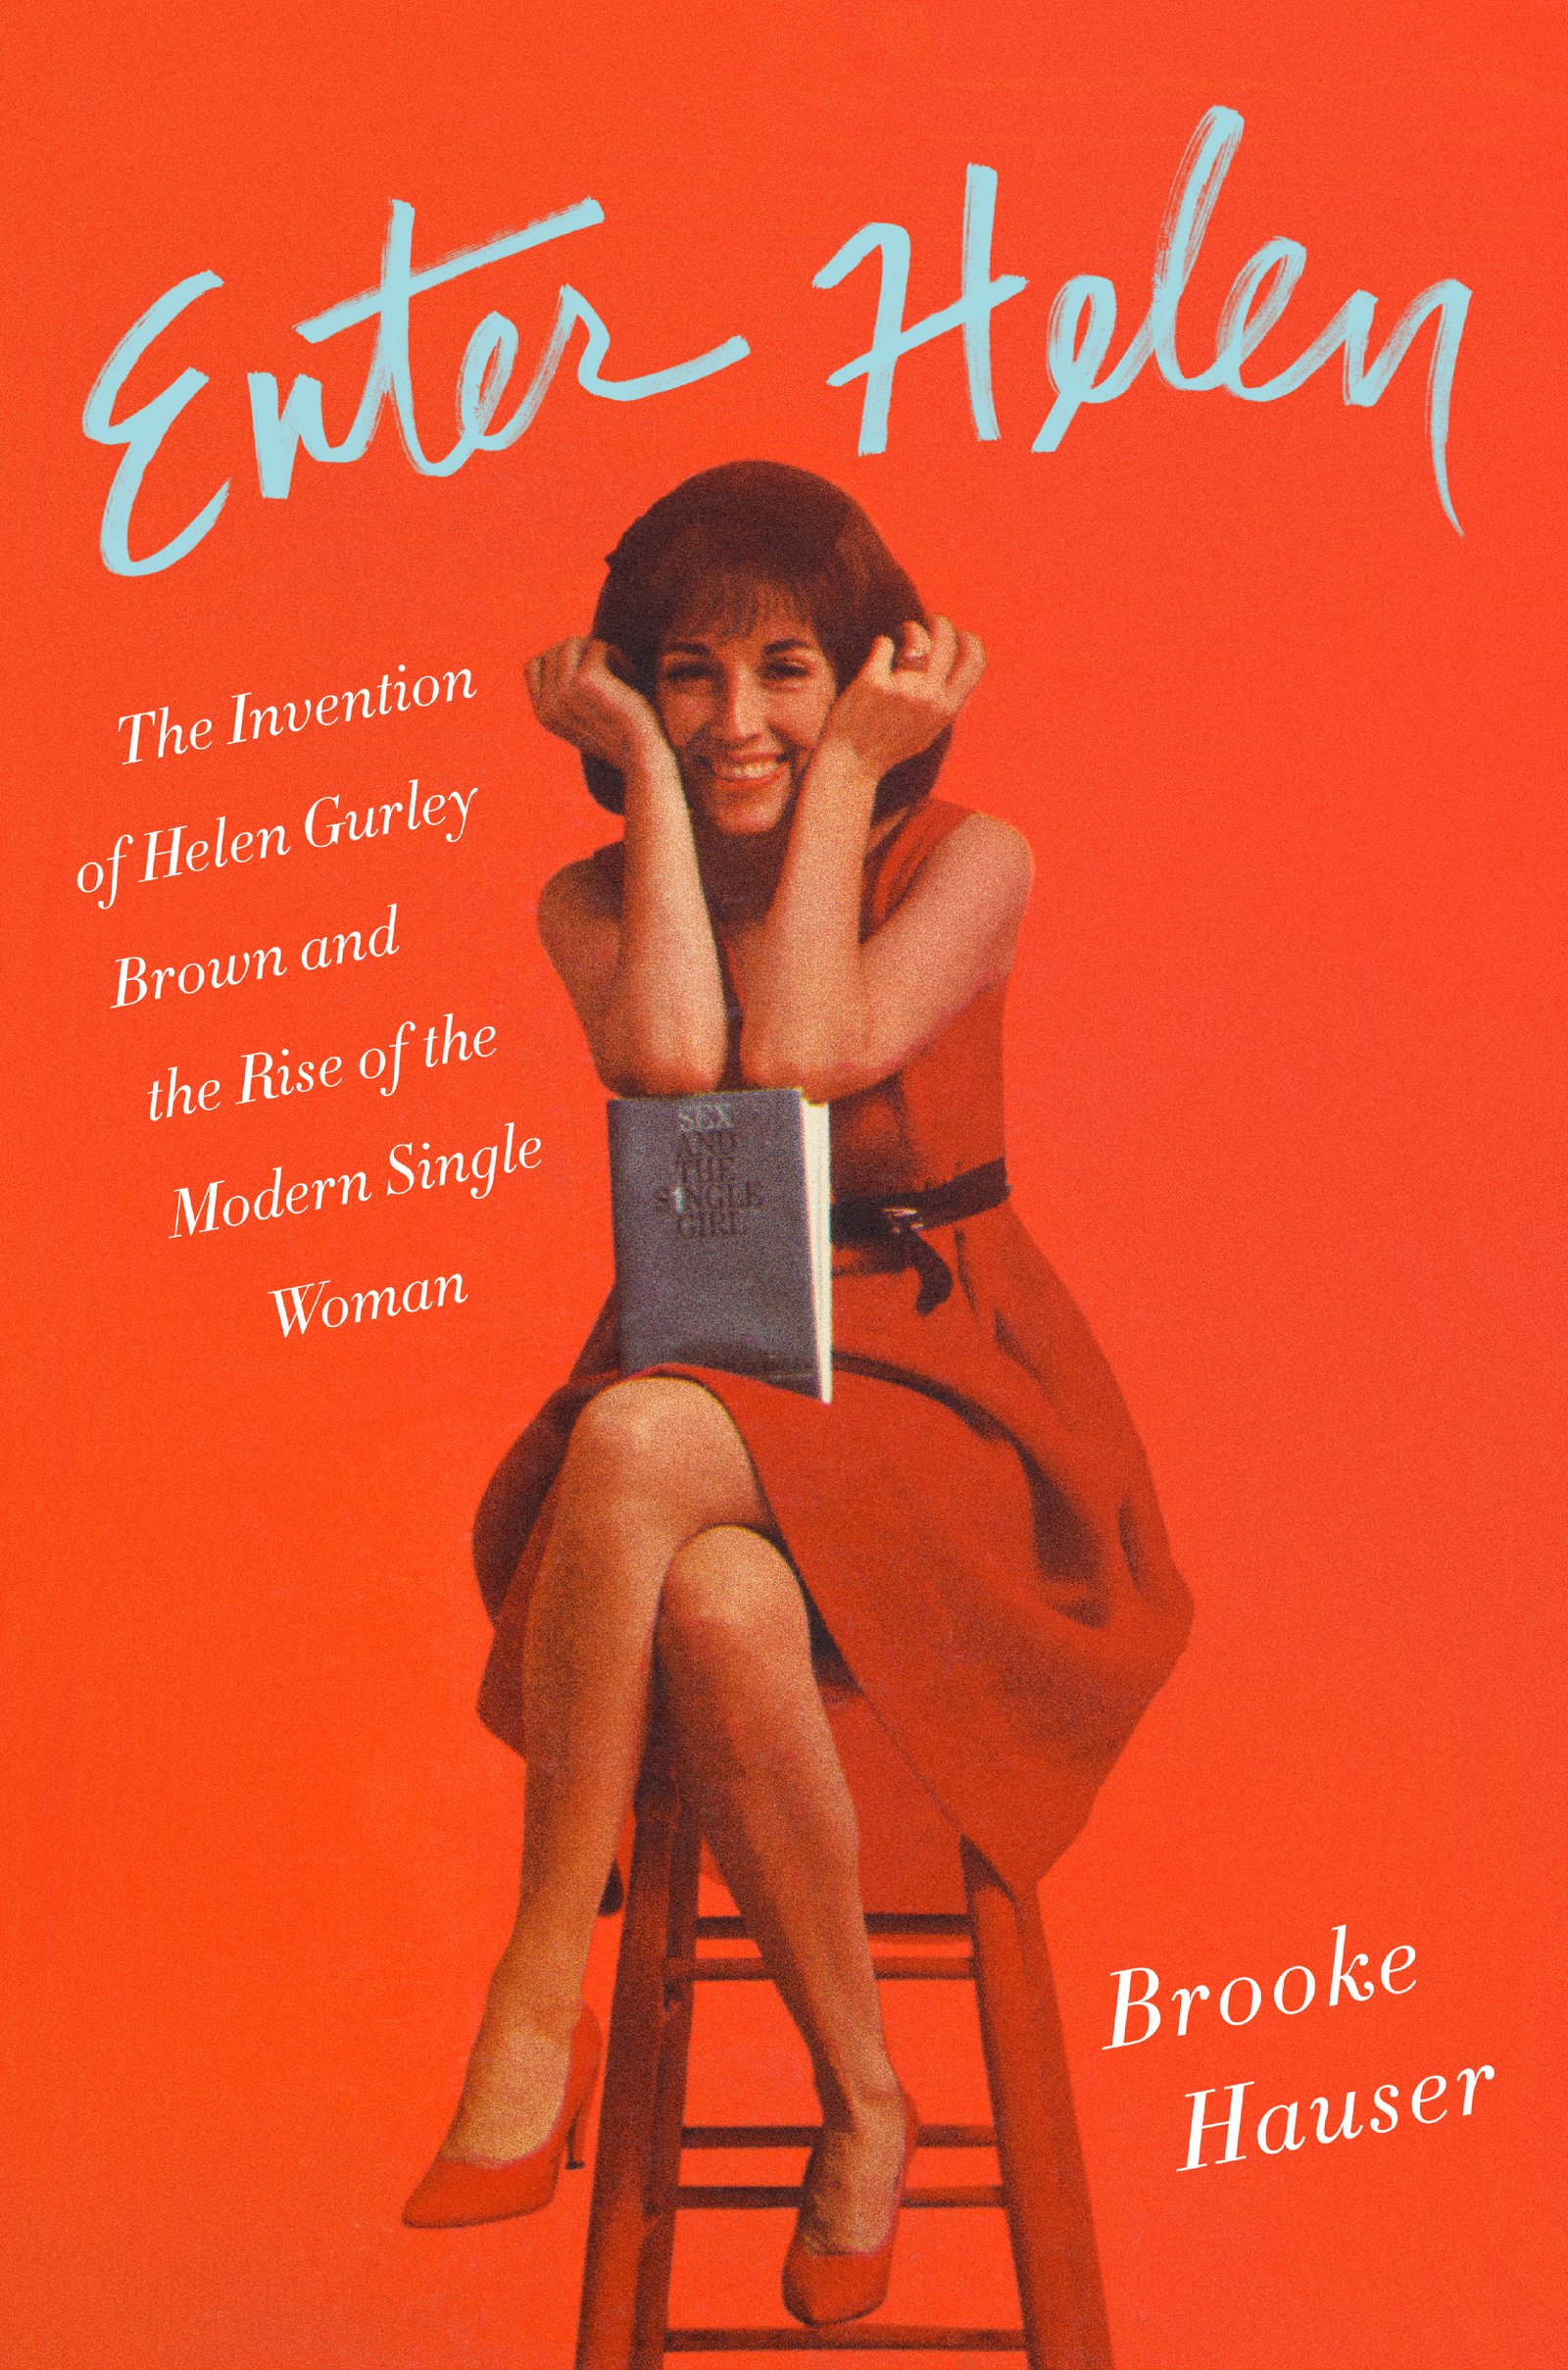 Book Launch: Enter Helen: The Invention of Helen Gurley Brown and the Rise of the Modern Single Woman by Brooke Hauser in conversation with Anna Holmes and Rachel Syme